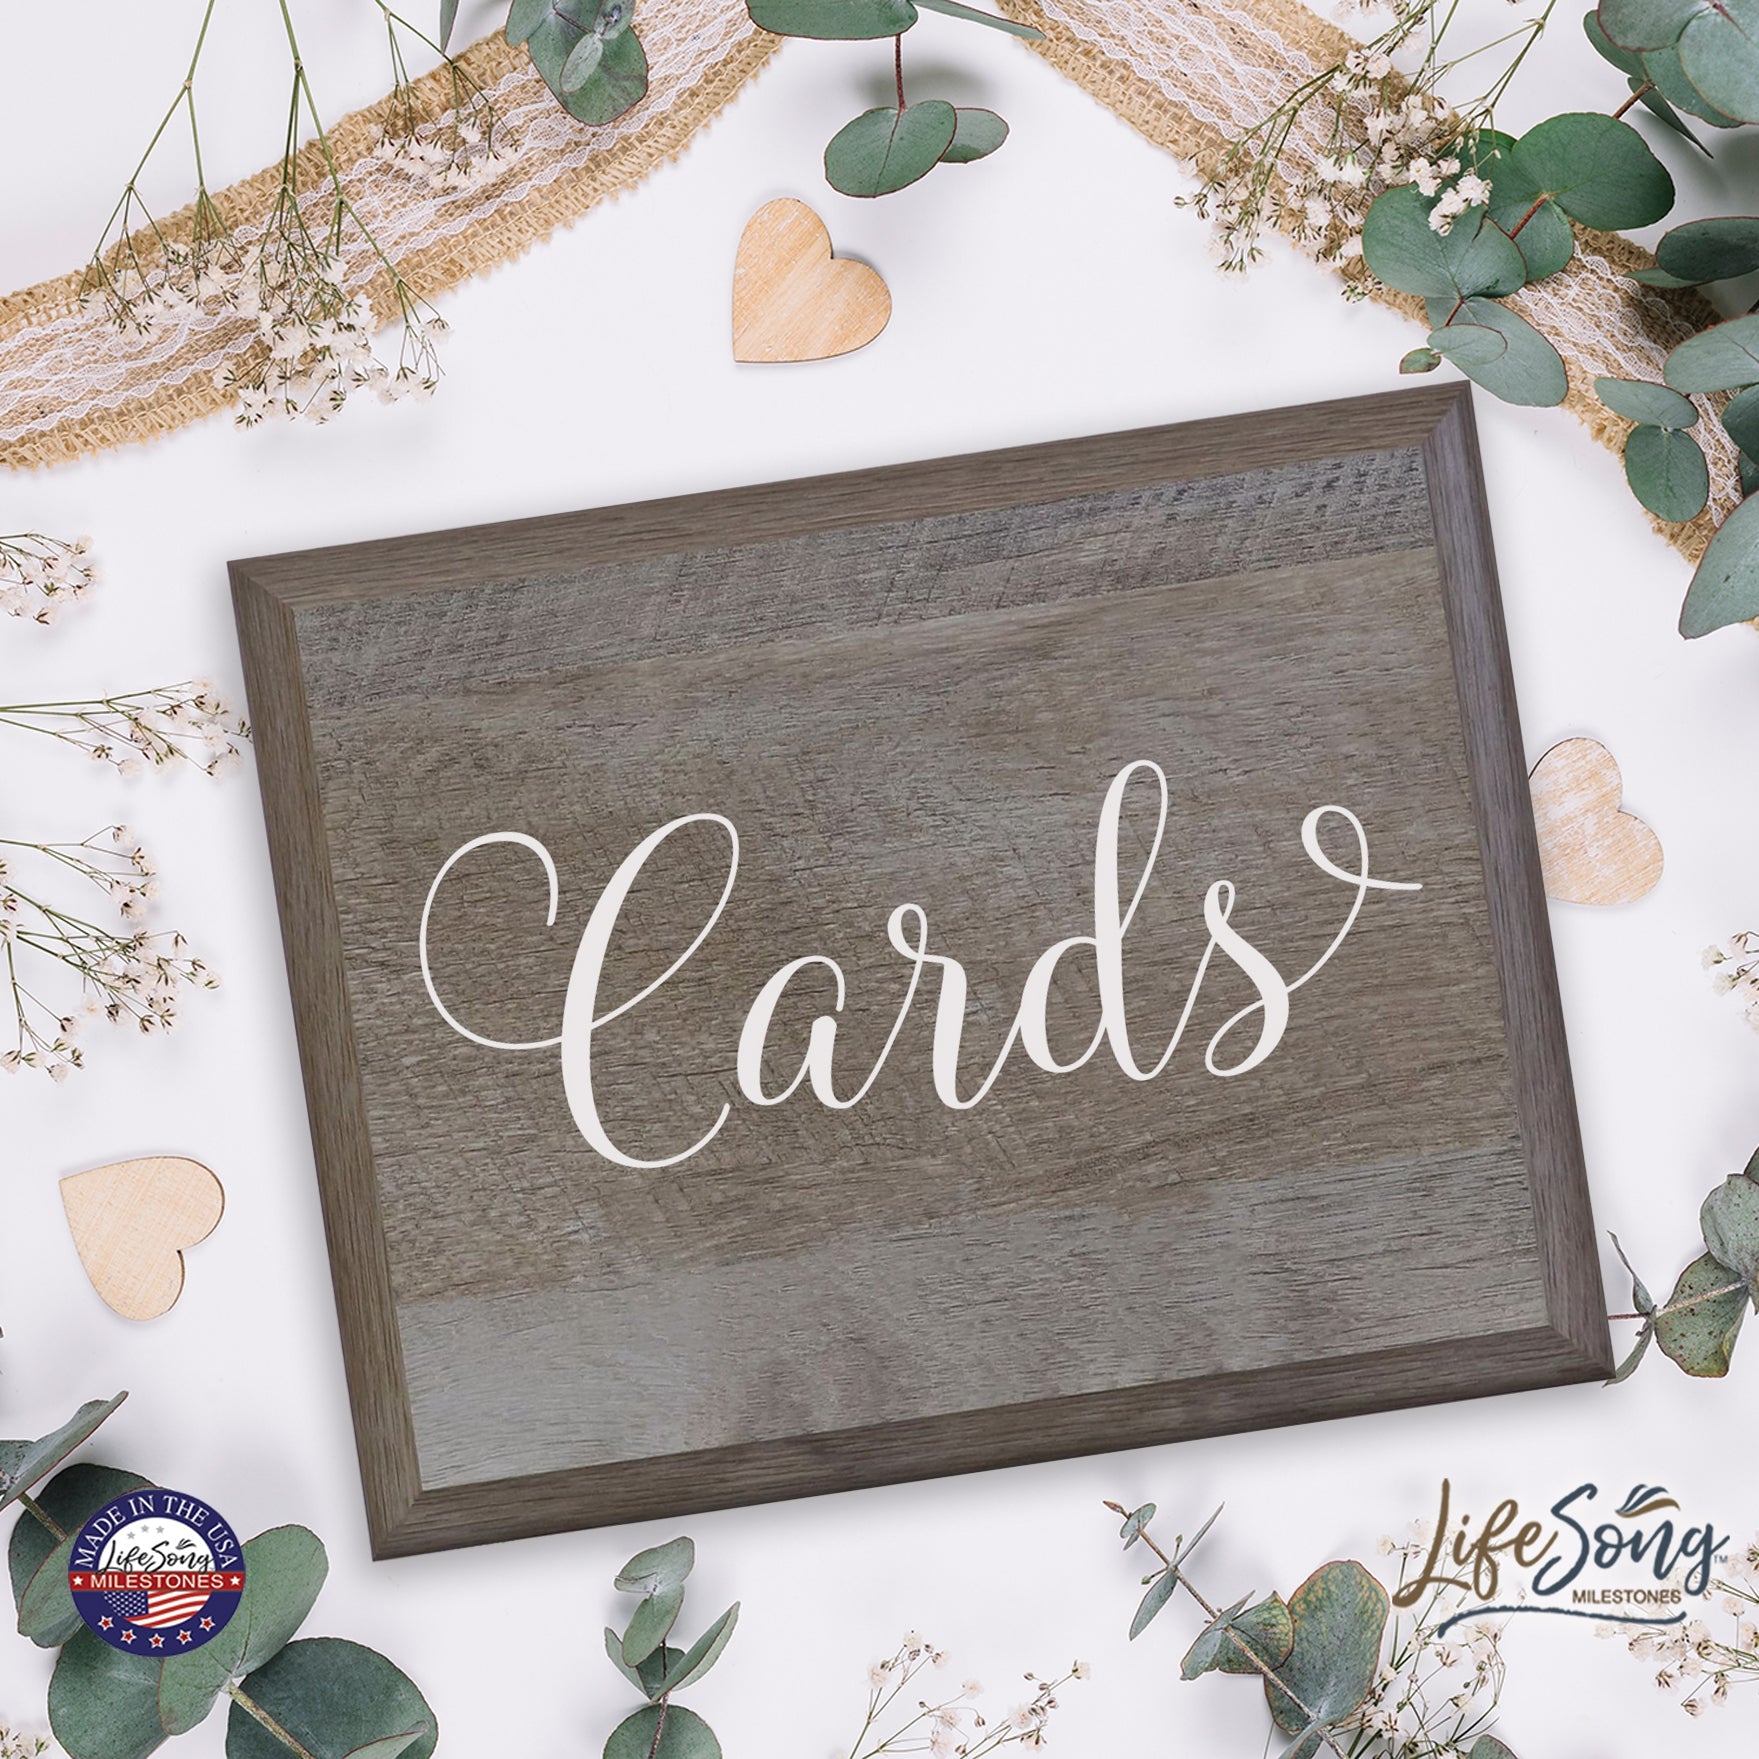 Cards Wooden Decorative Wedding Party signs (8x10) - LifeSong Milestones